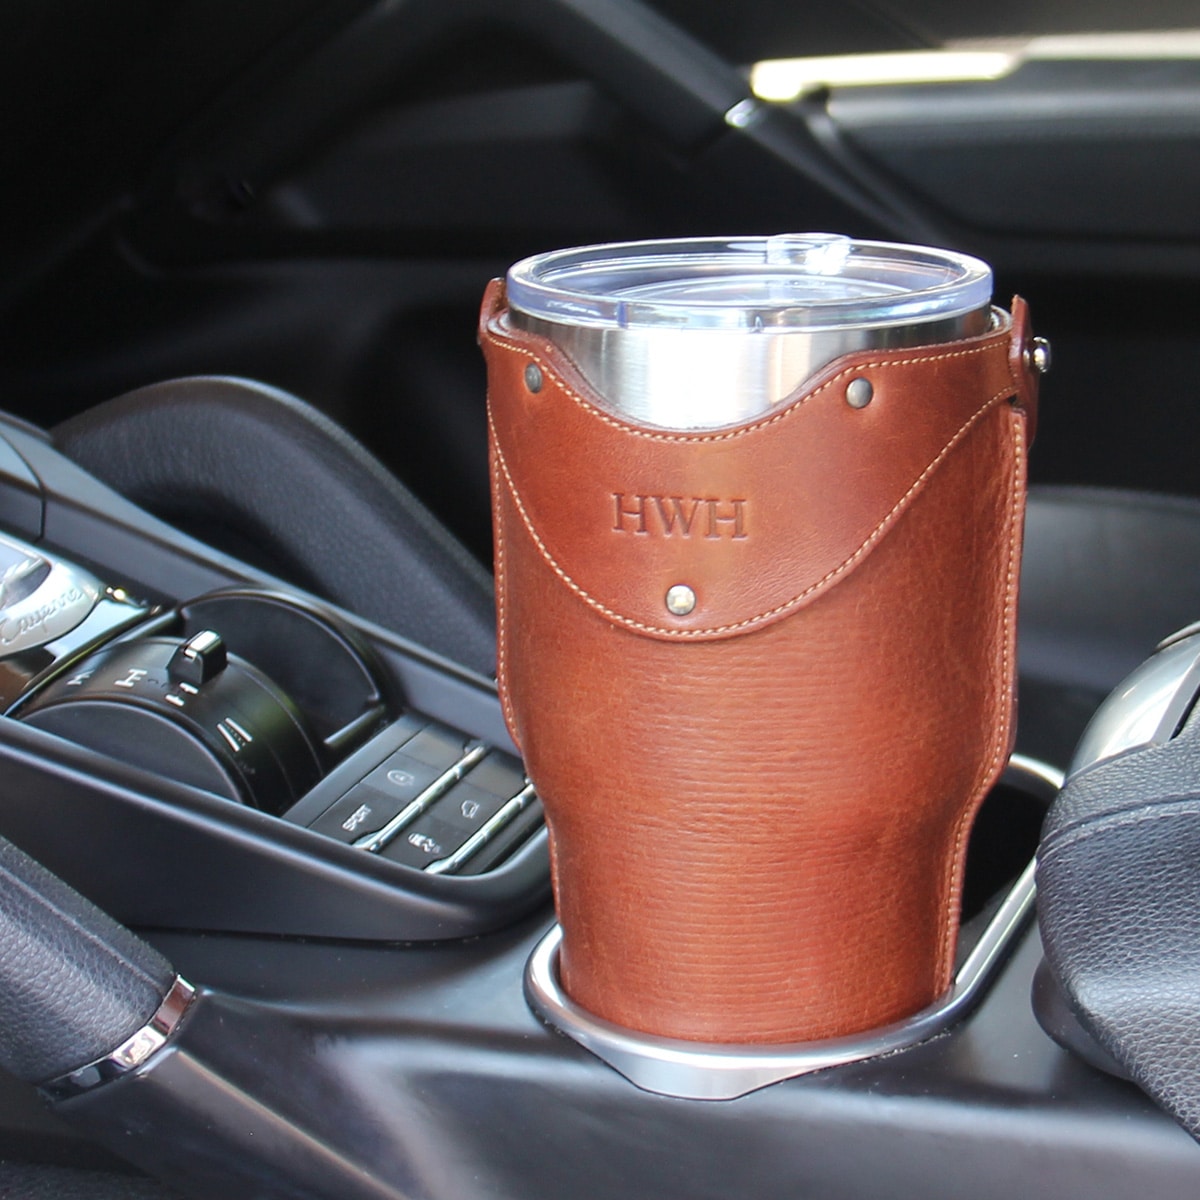 Tumbler or Cup Holder